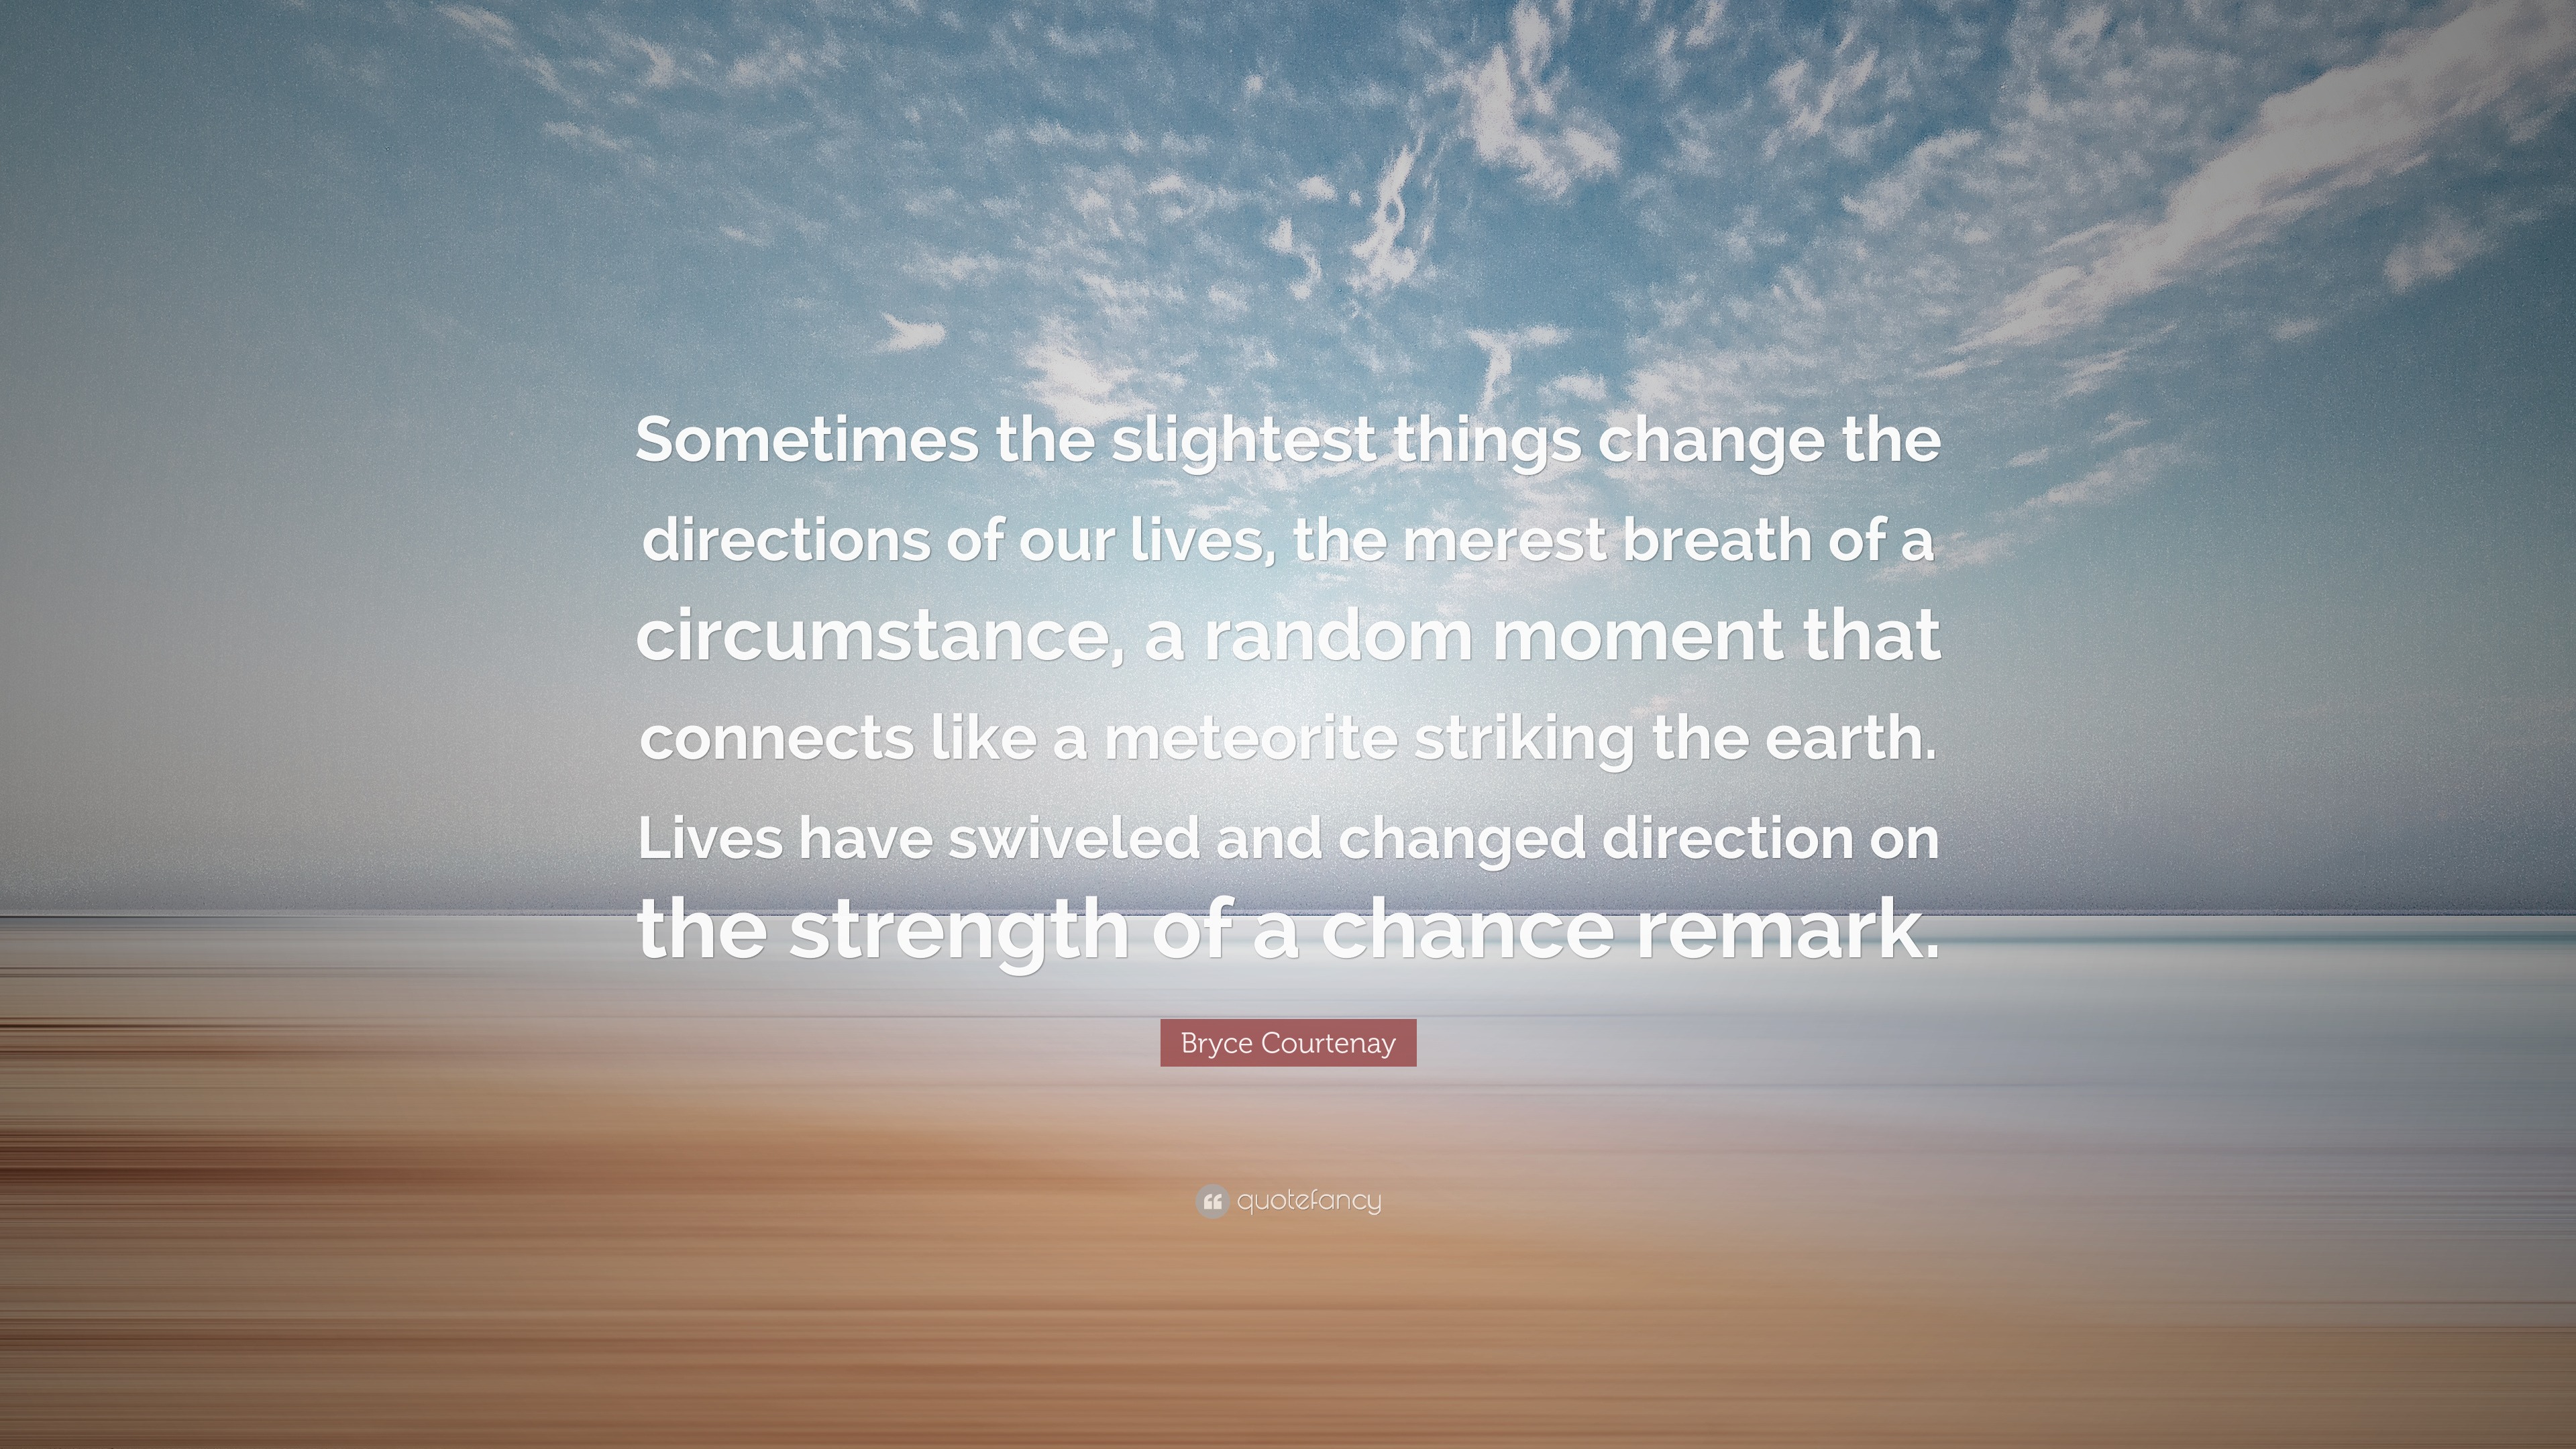 Bryce Courtenay Quote: “Sometimes the slightest things change the ...